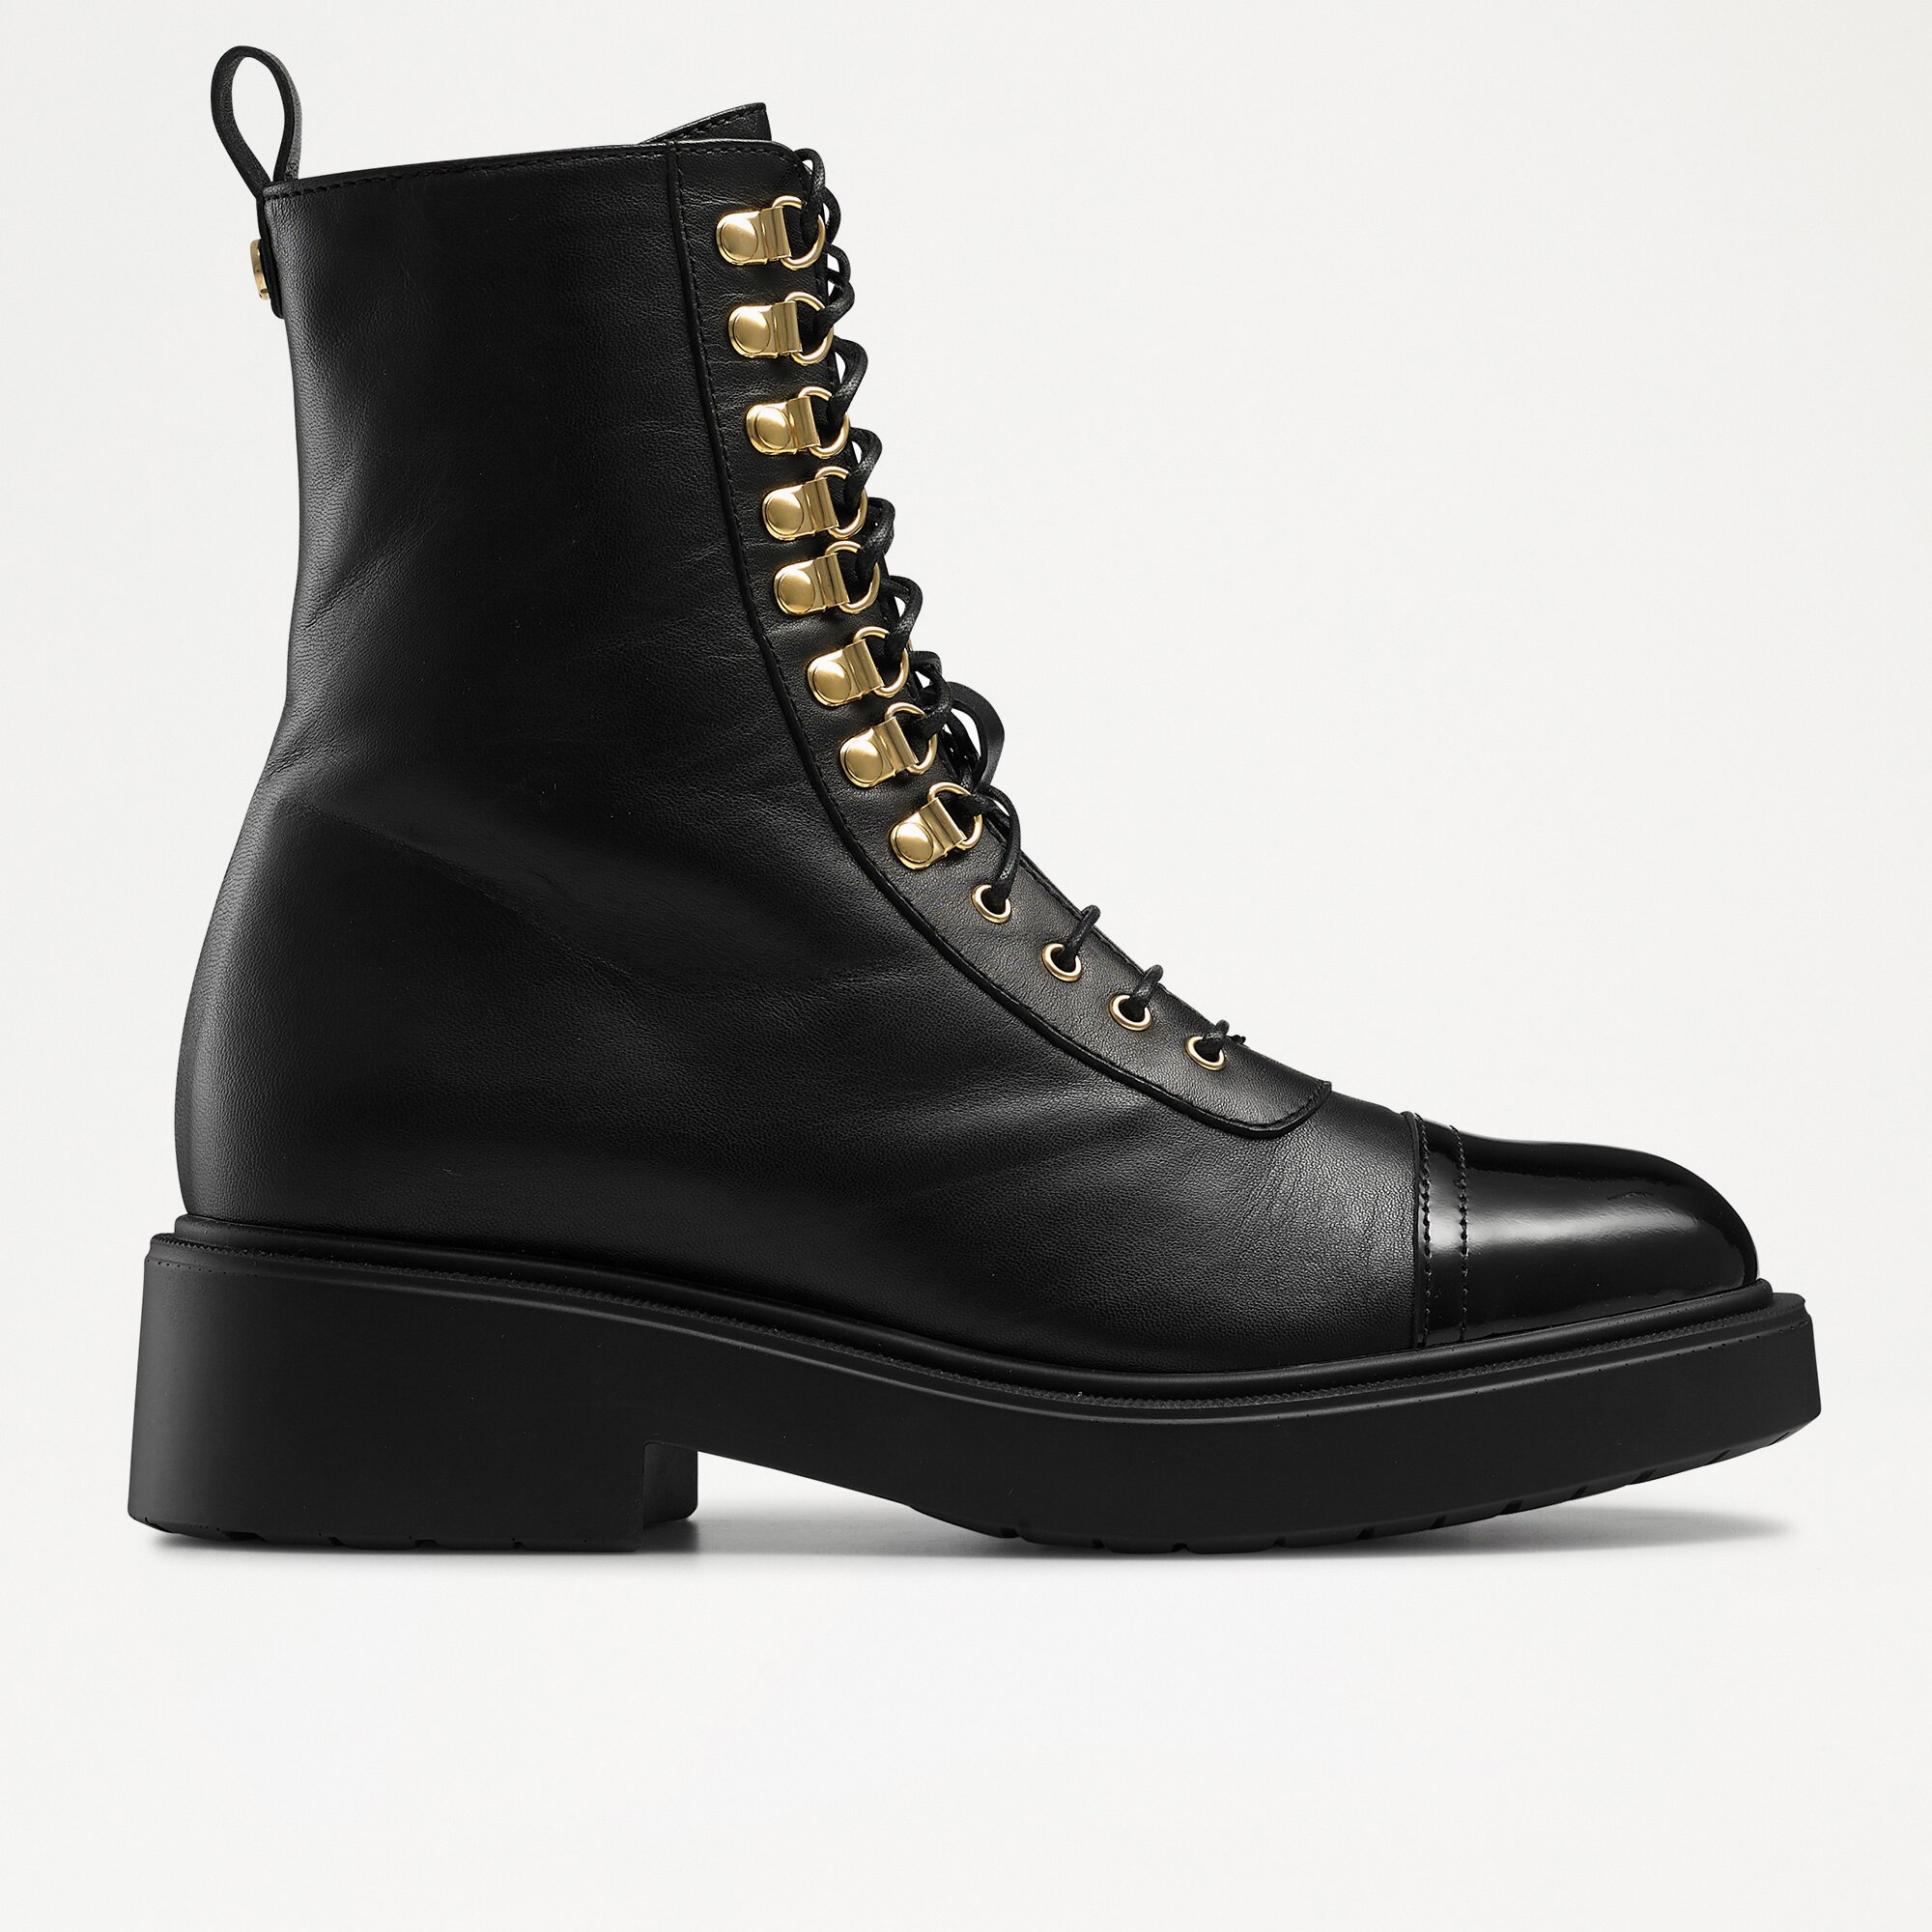 LIGHTNING Toe Cap Lace Up Boot in Black Leather | Russell & Bromley